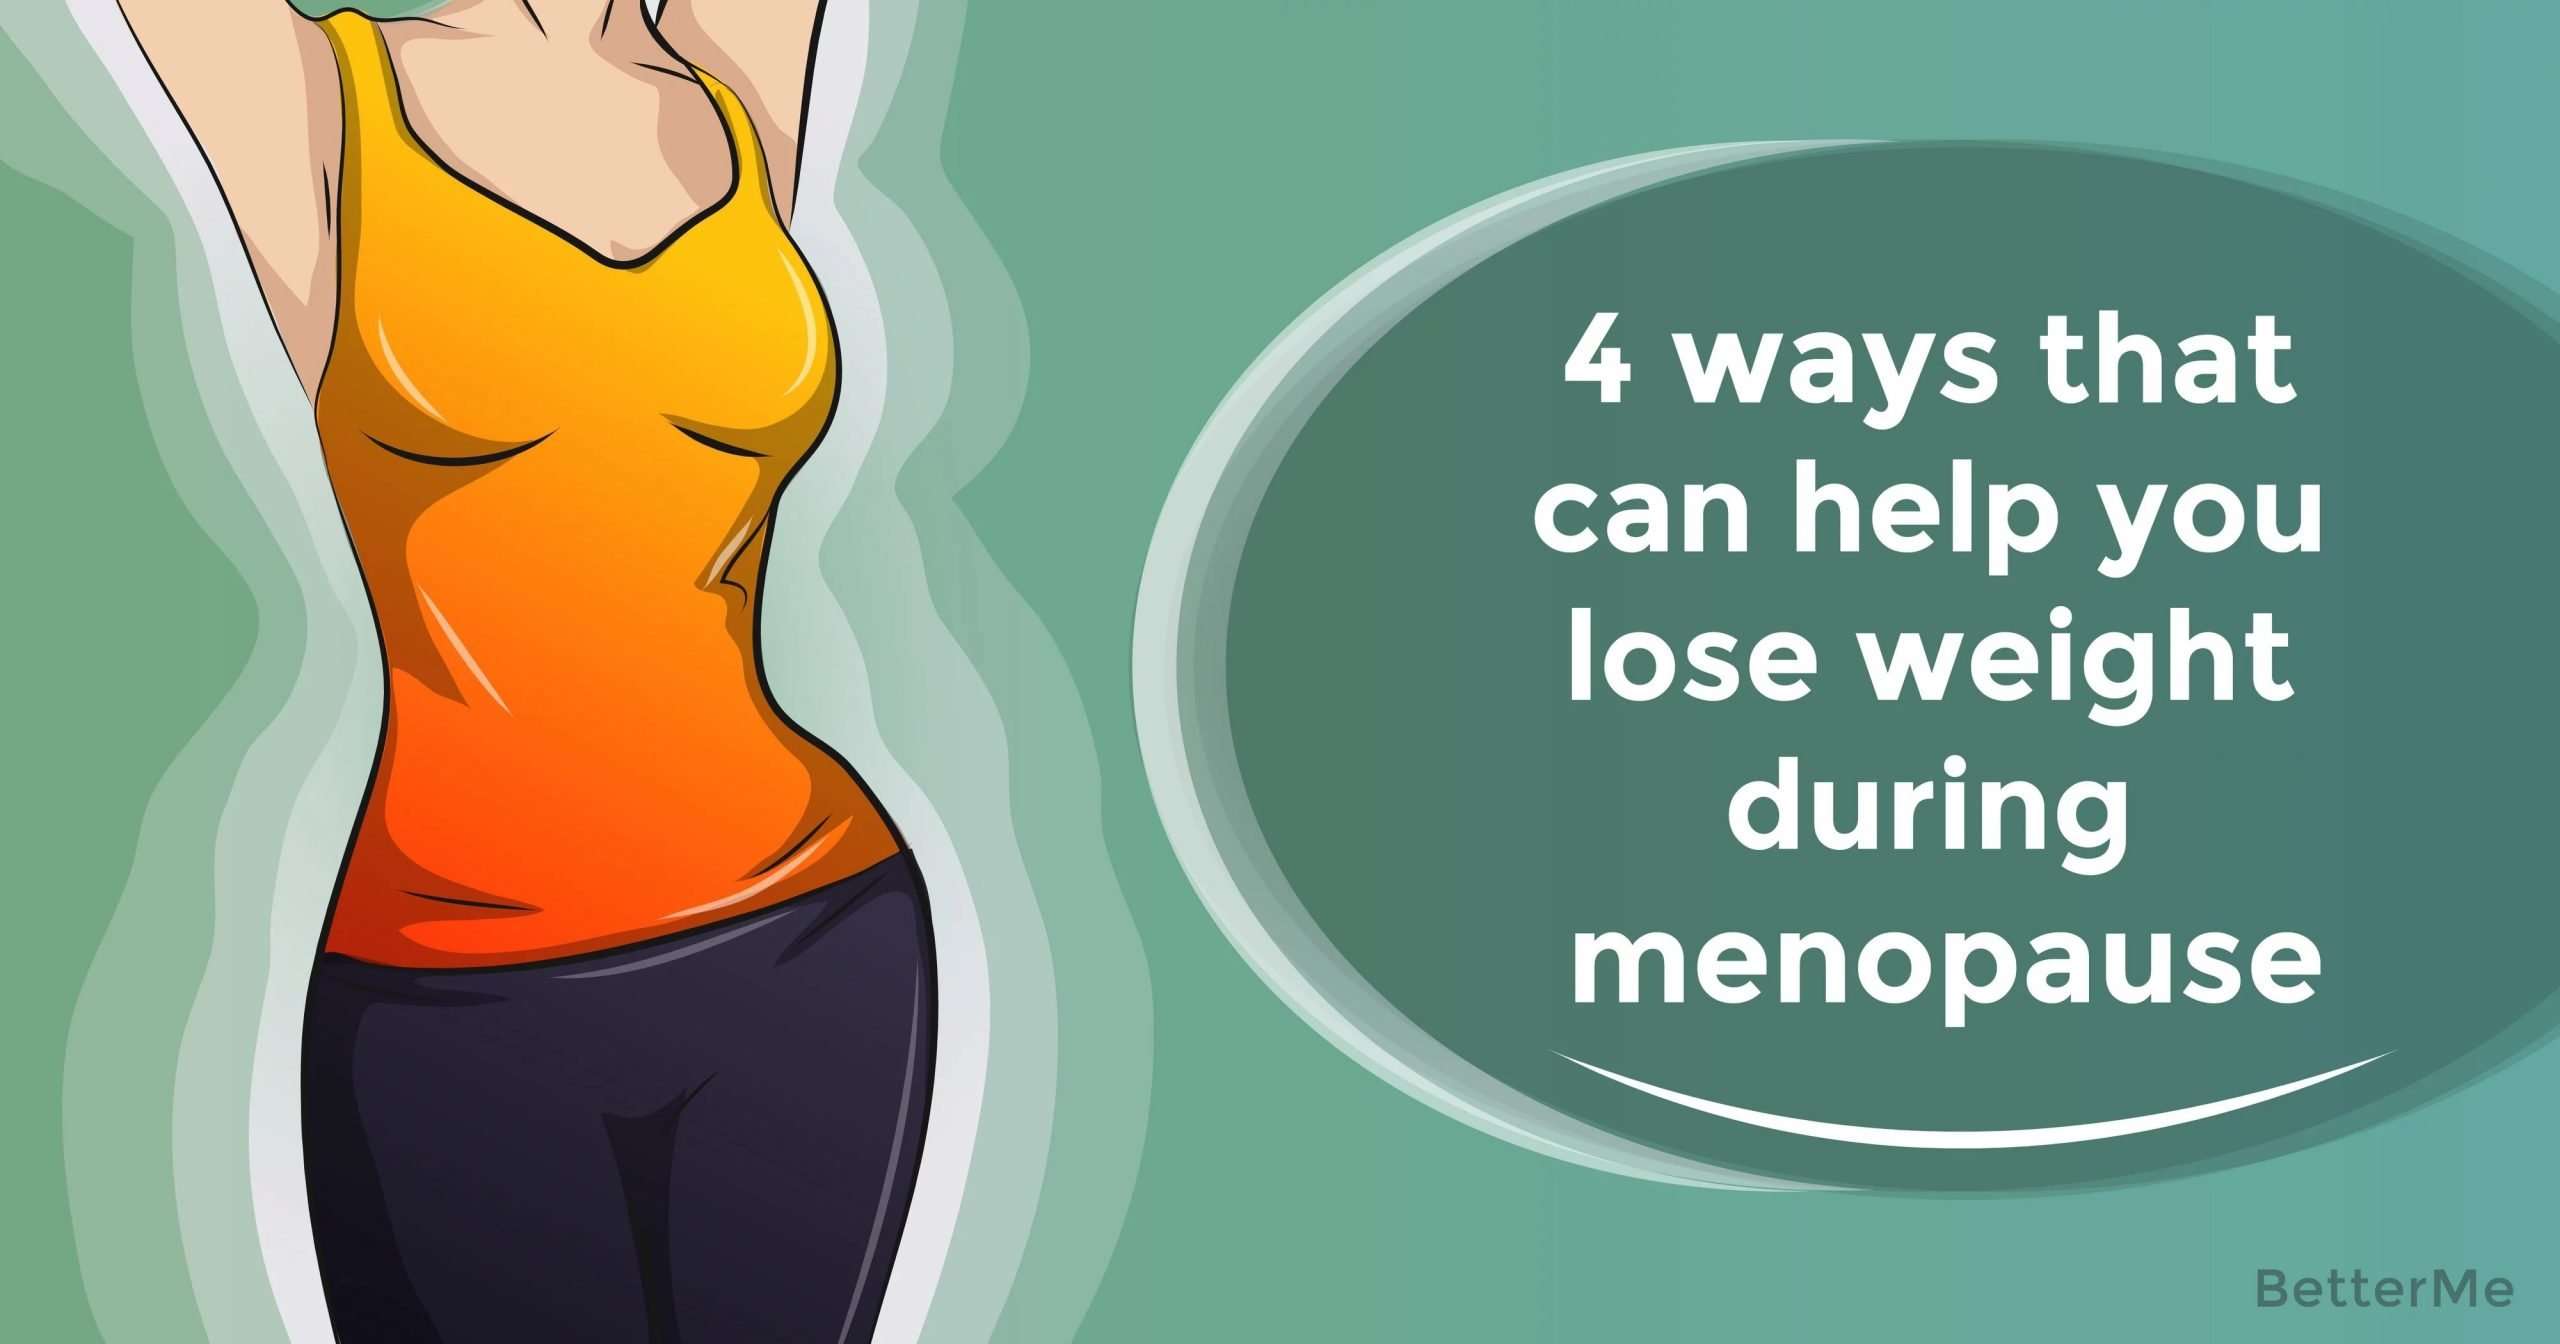 4 ways that can help you lose weight during menopause